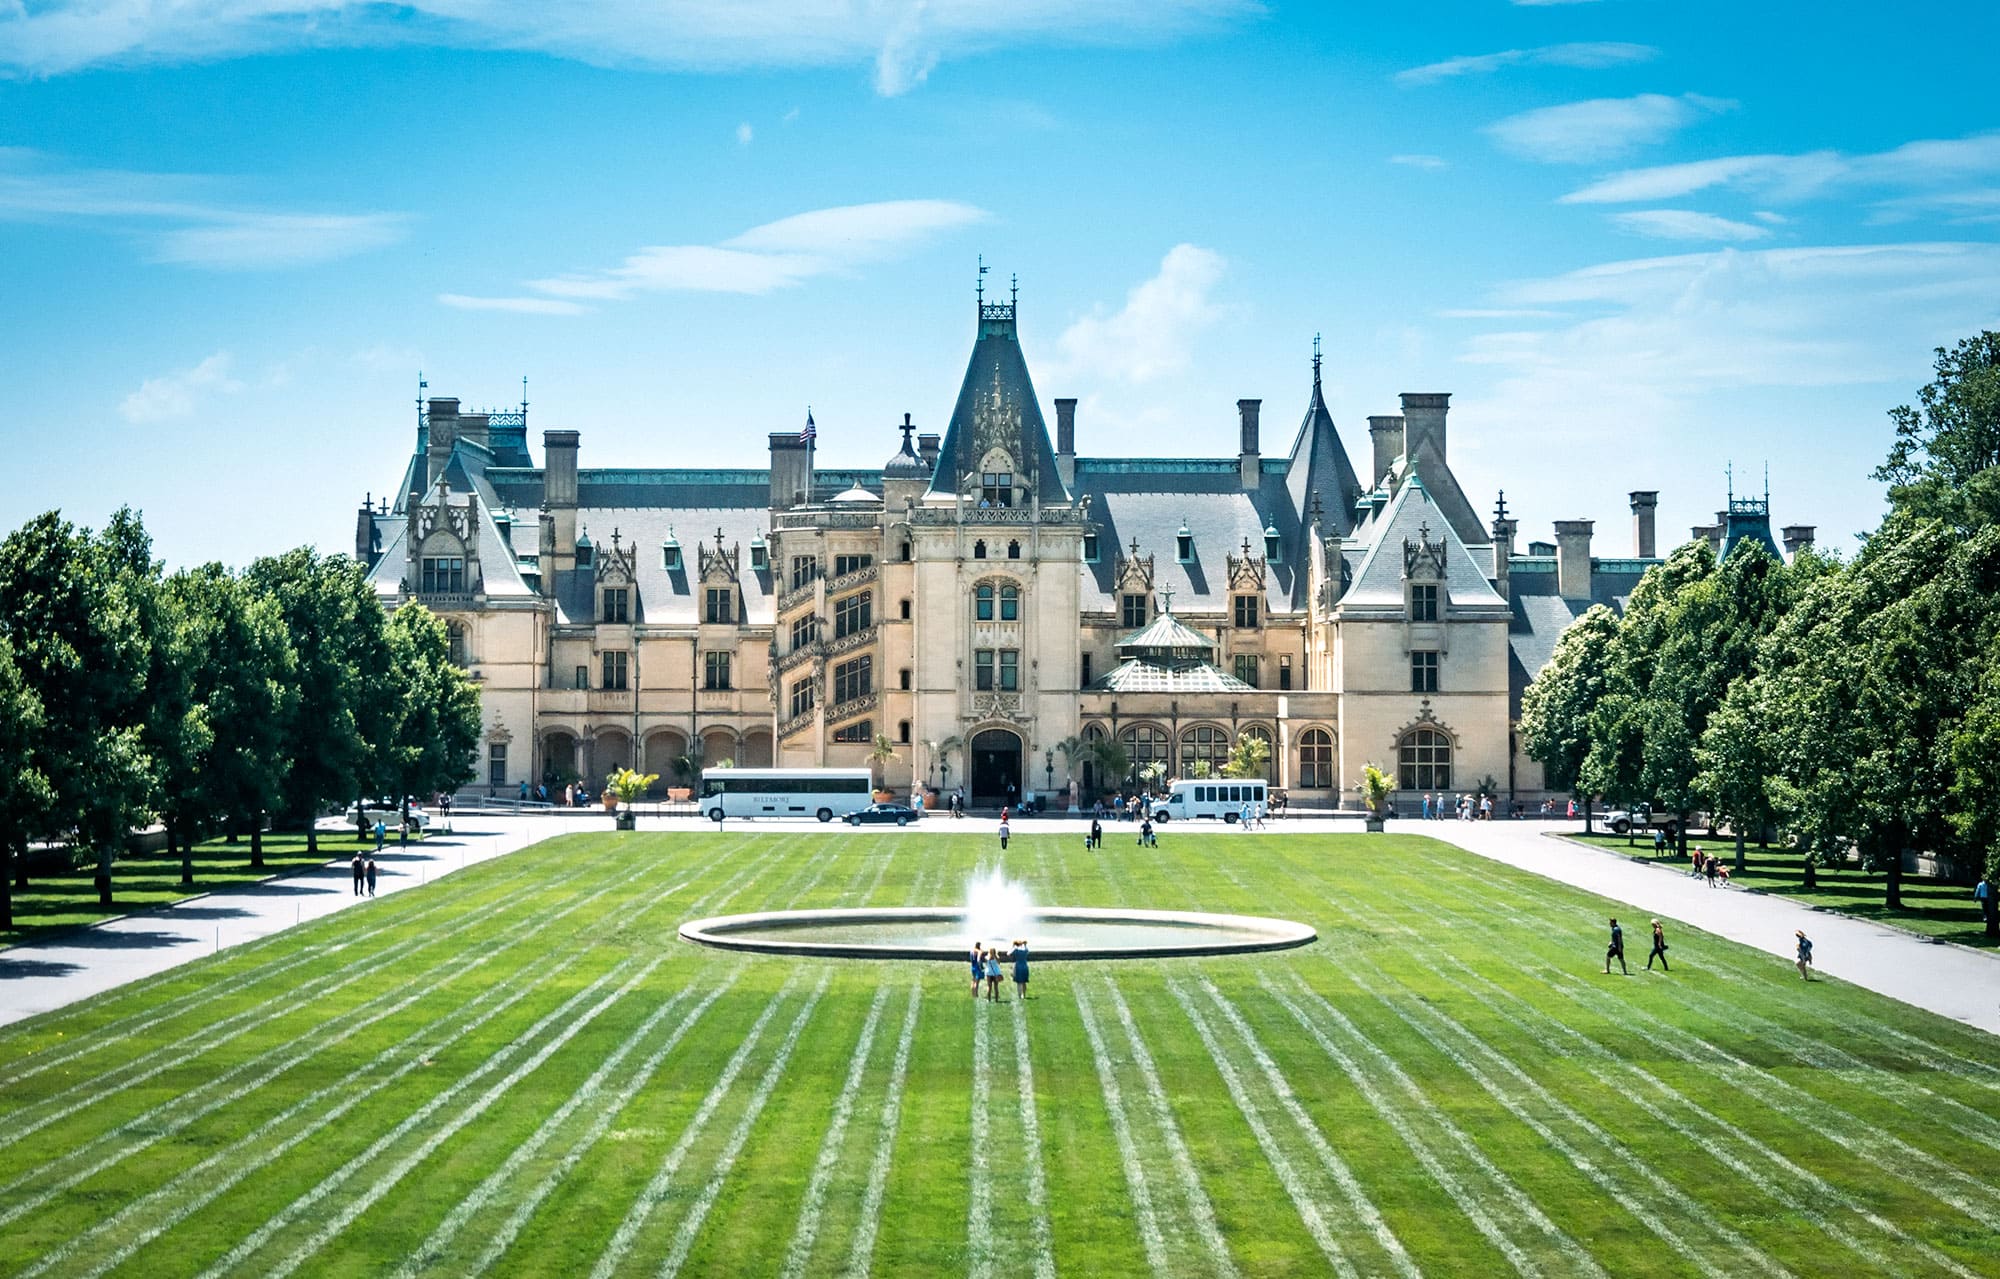 The Biltmore Estate: Visiting America's Largest Private Home